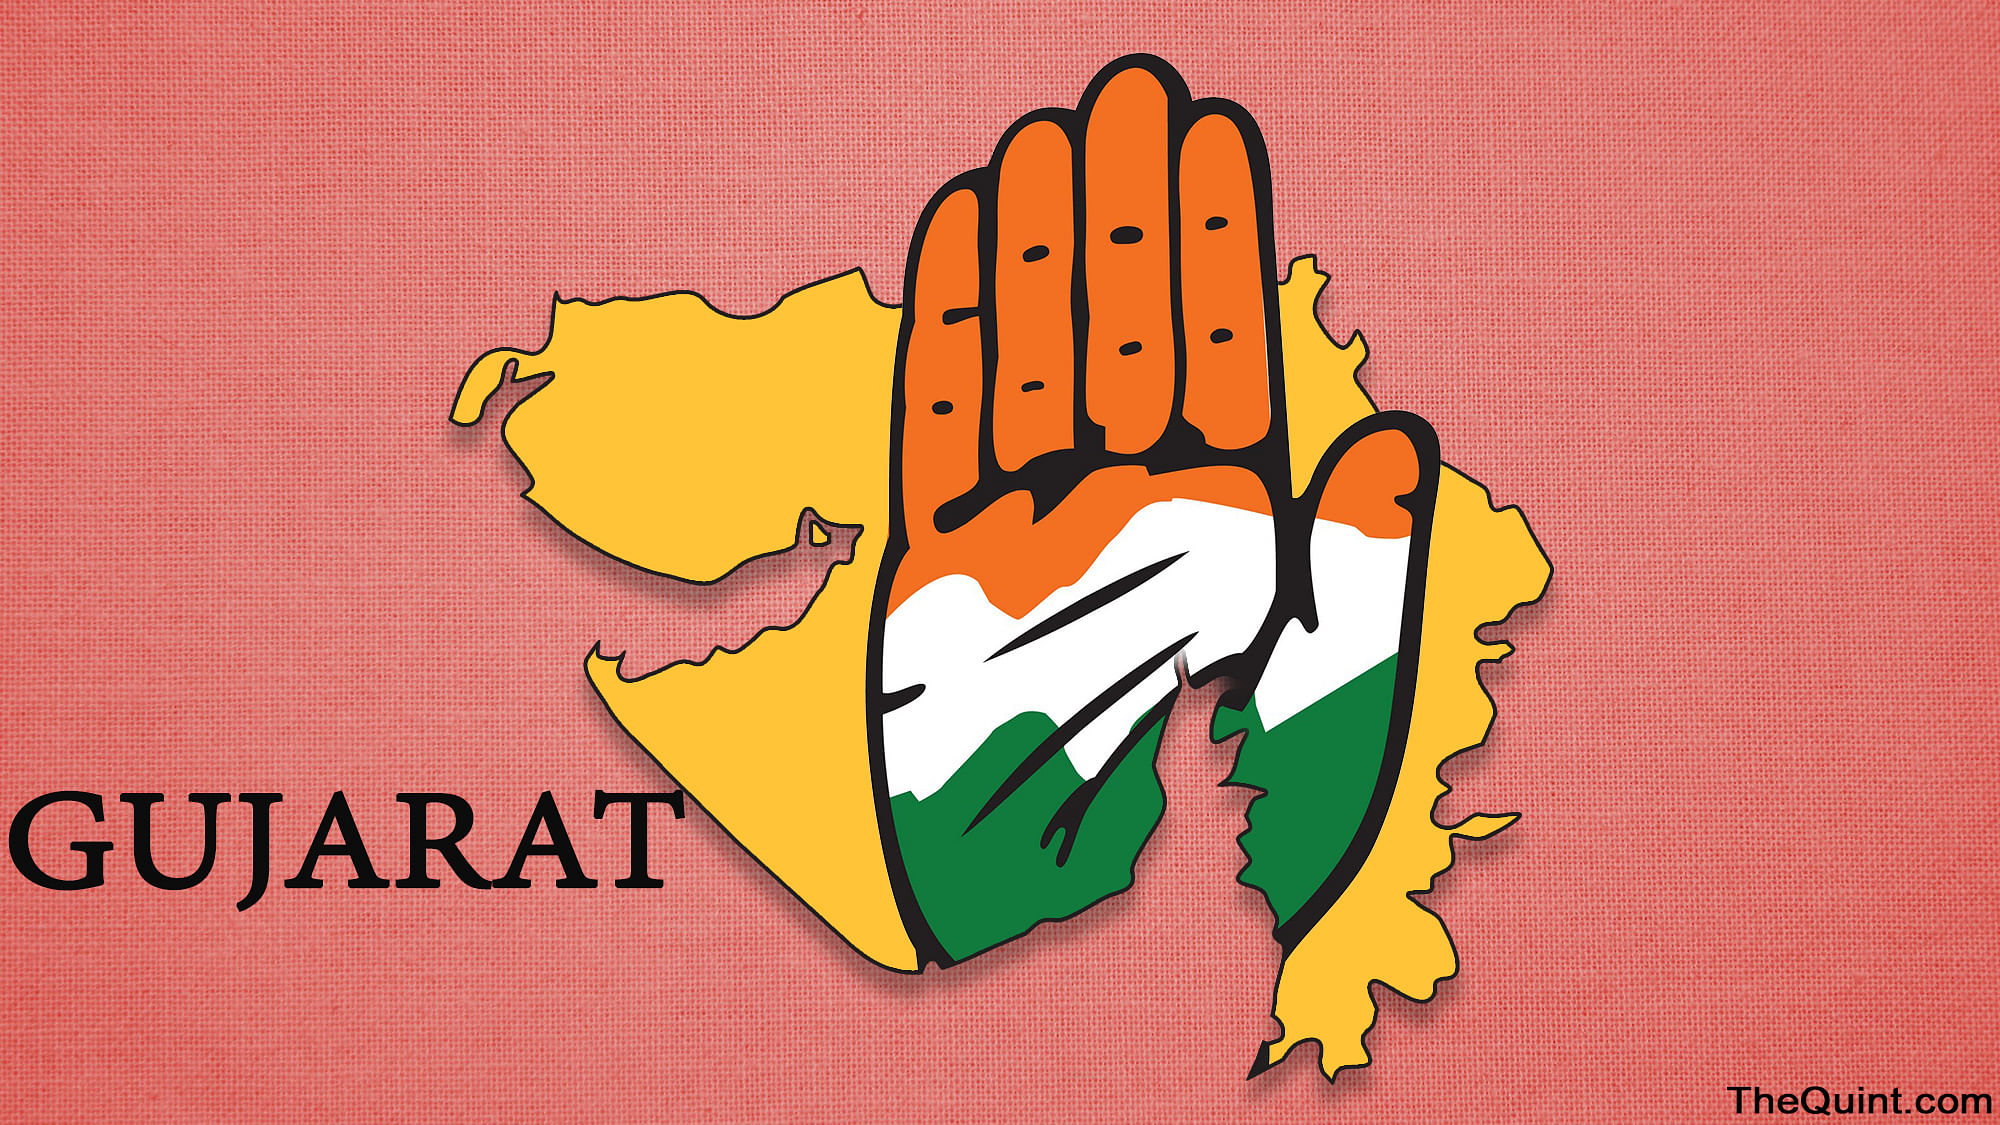 Congress president Sonia Gandhi has approved the proposal to dissolve the panel of office-bearers and executive committee of the Gujarat Pradesh Congress Committee, said a statement from Congress general secretary (organisation) KC Venugopal.